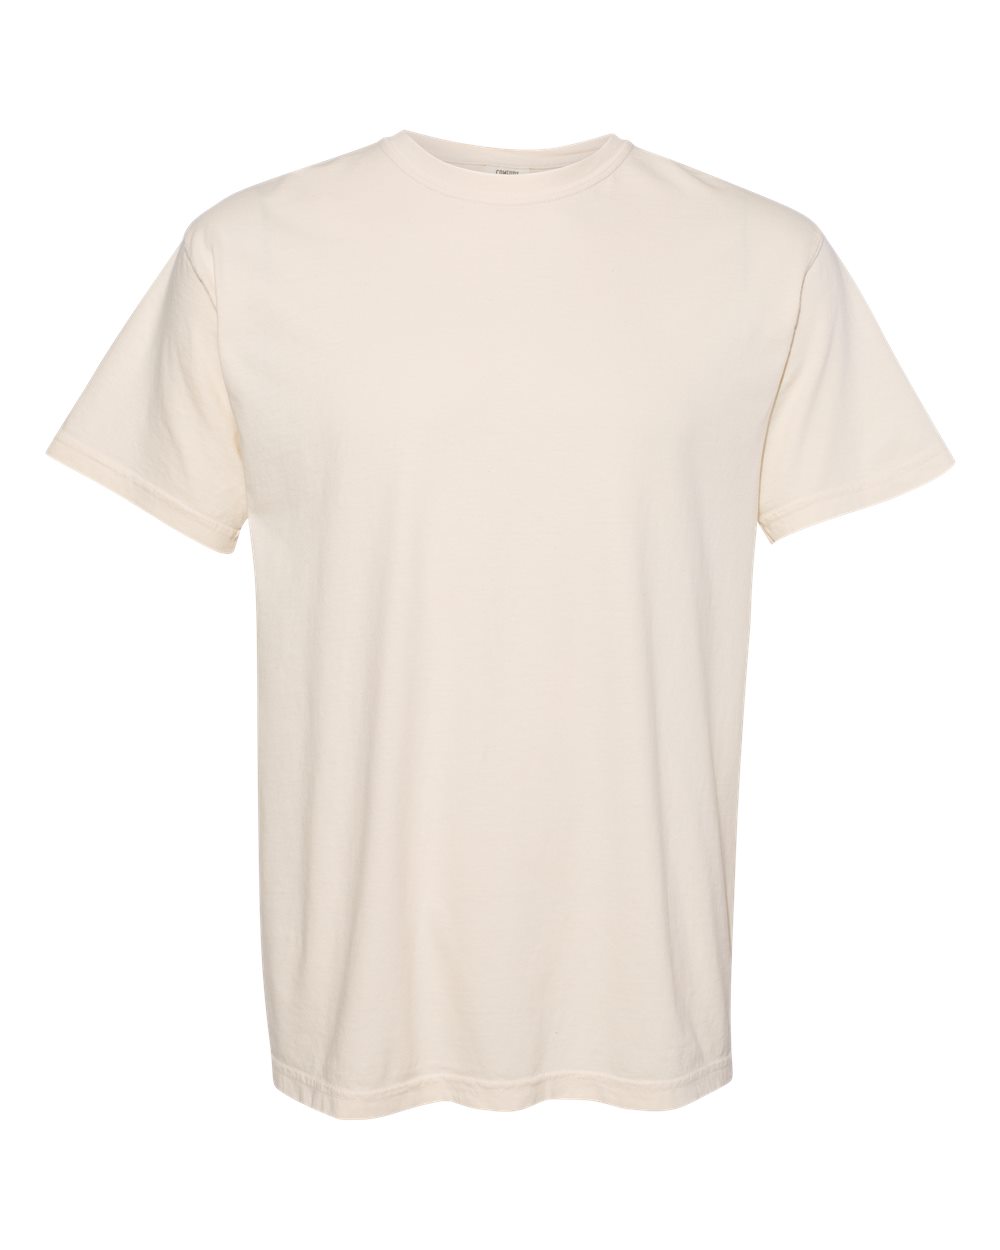 Comfort Colors Garment-Dyed Tee (1717) in Ivory